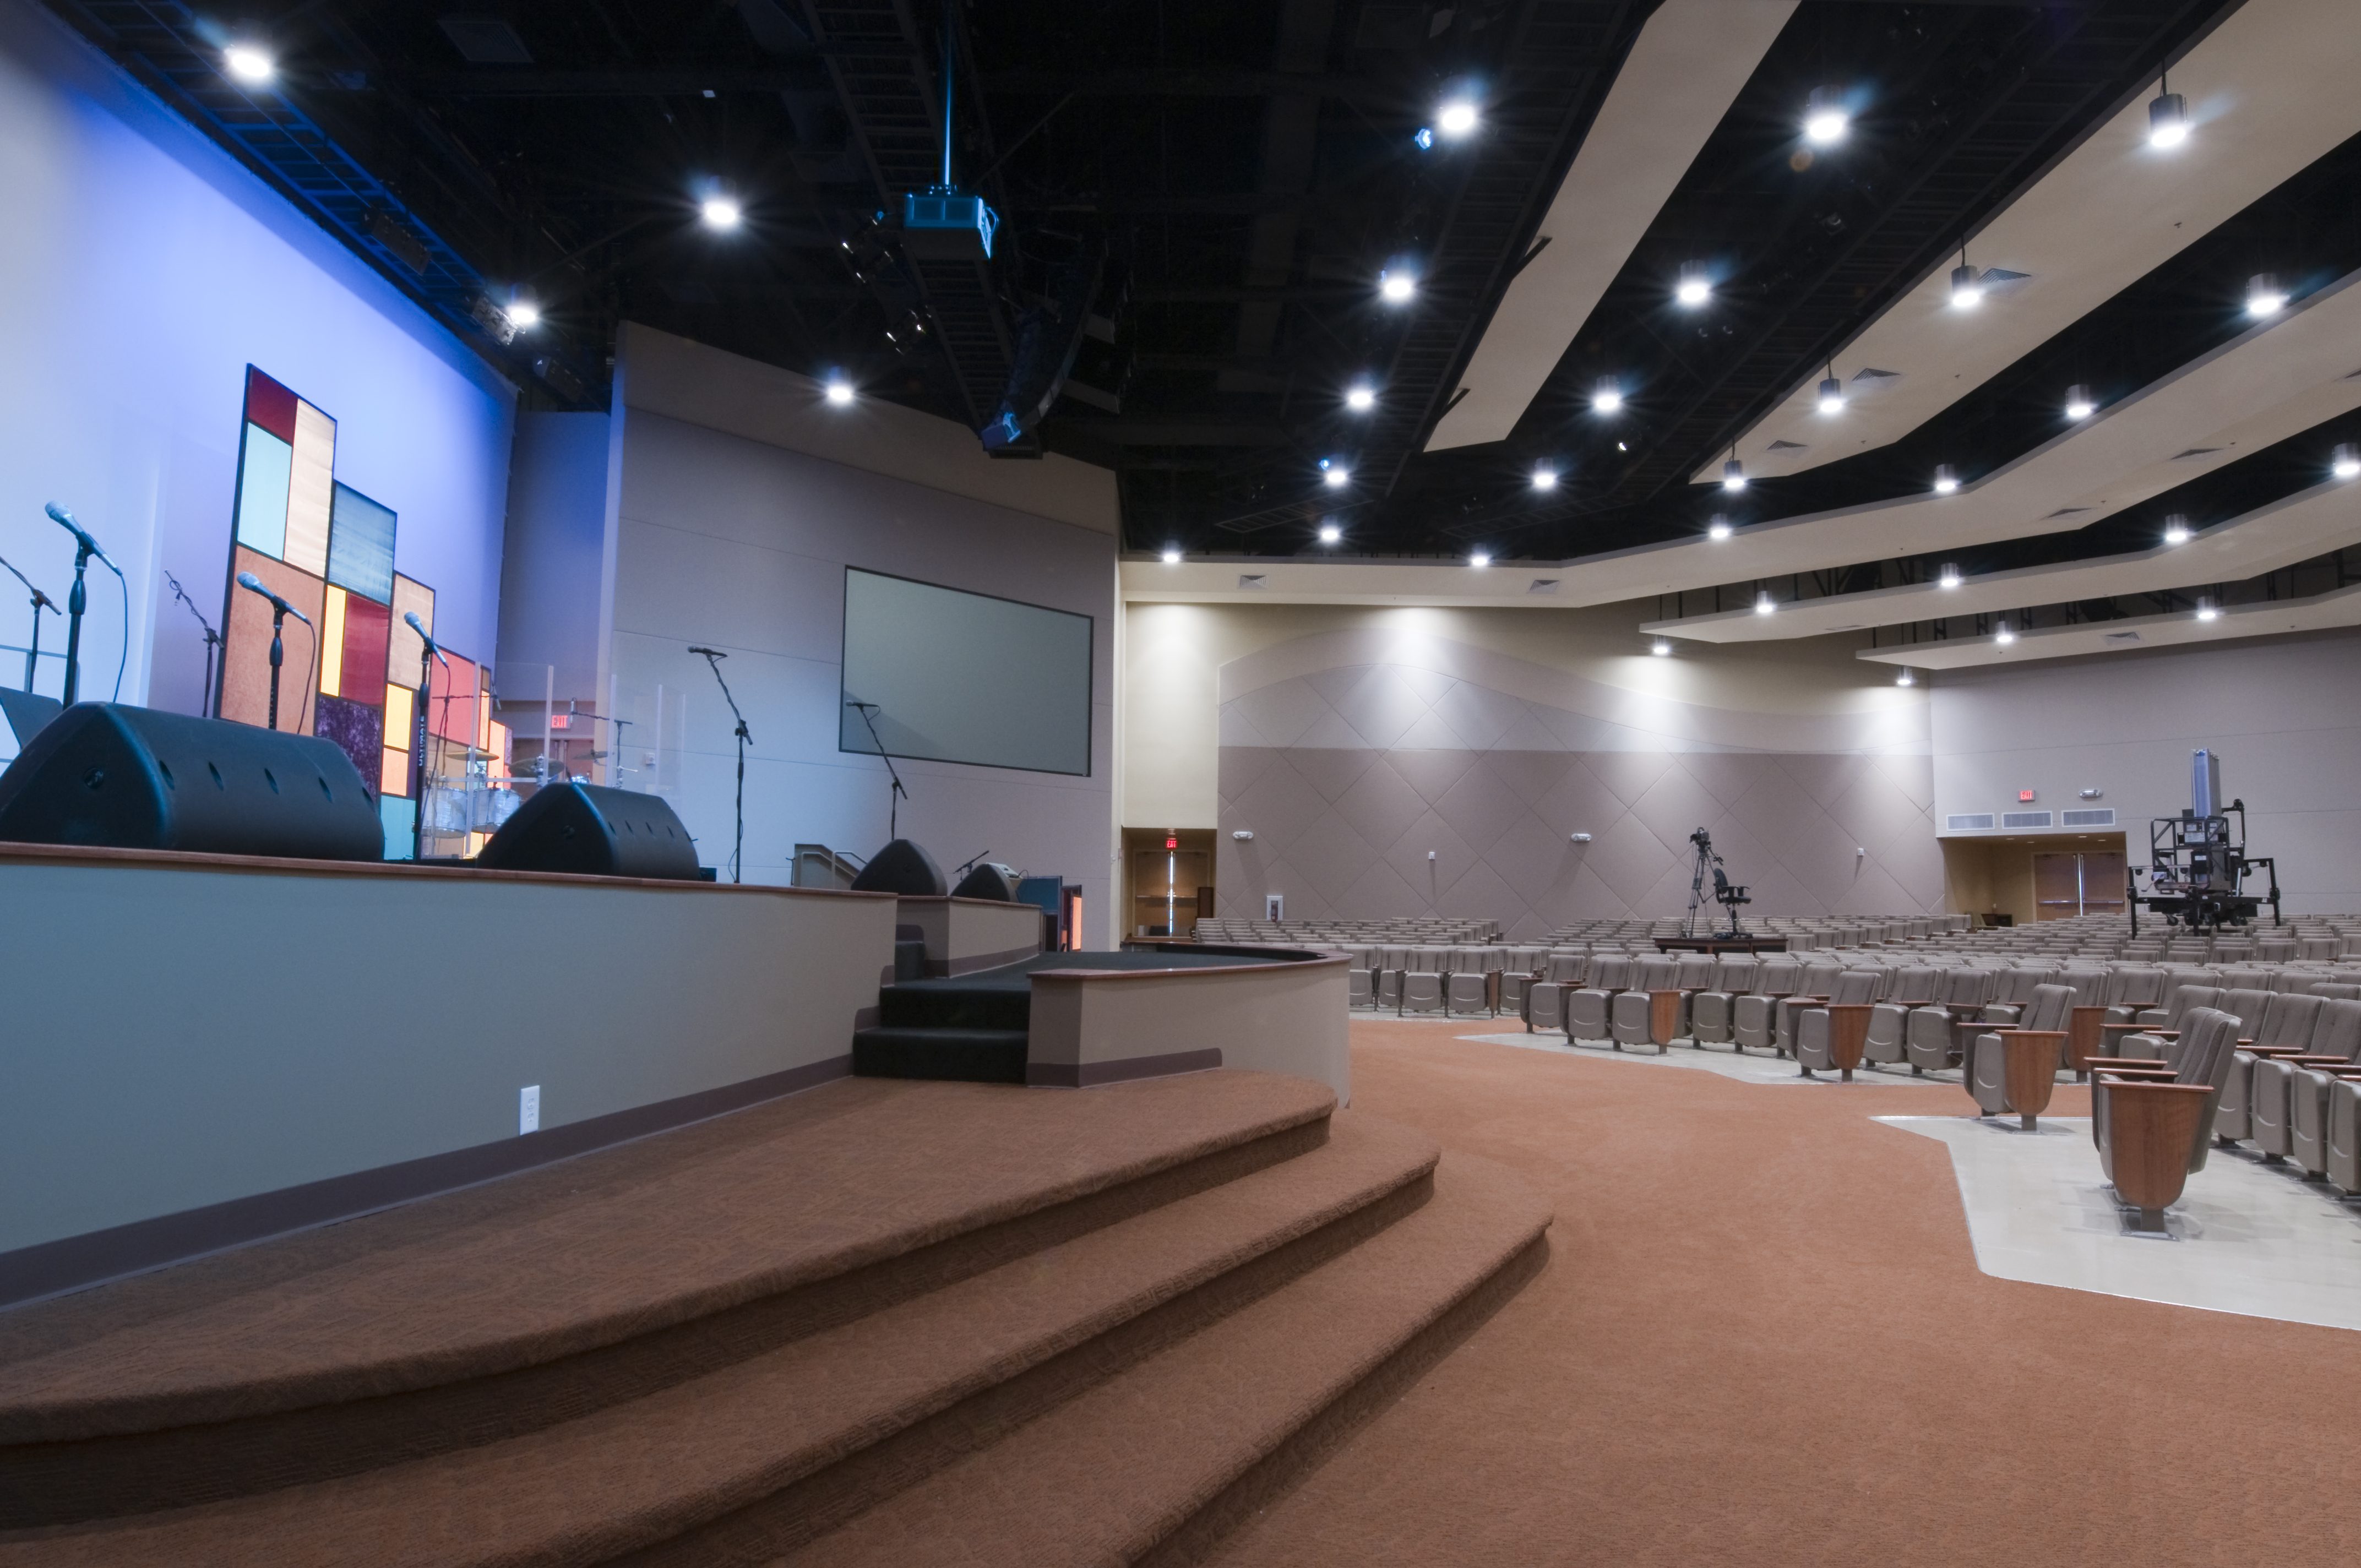 How To Choose The Best Projector Screen And Projector For Your Church